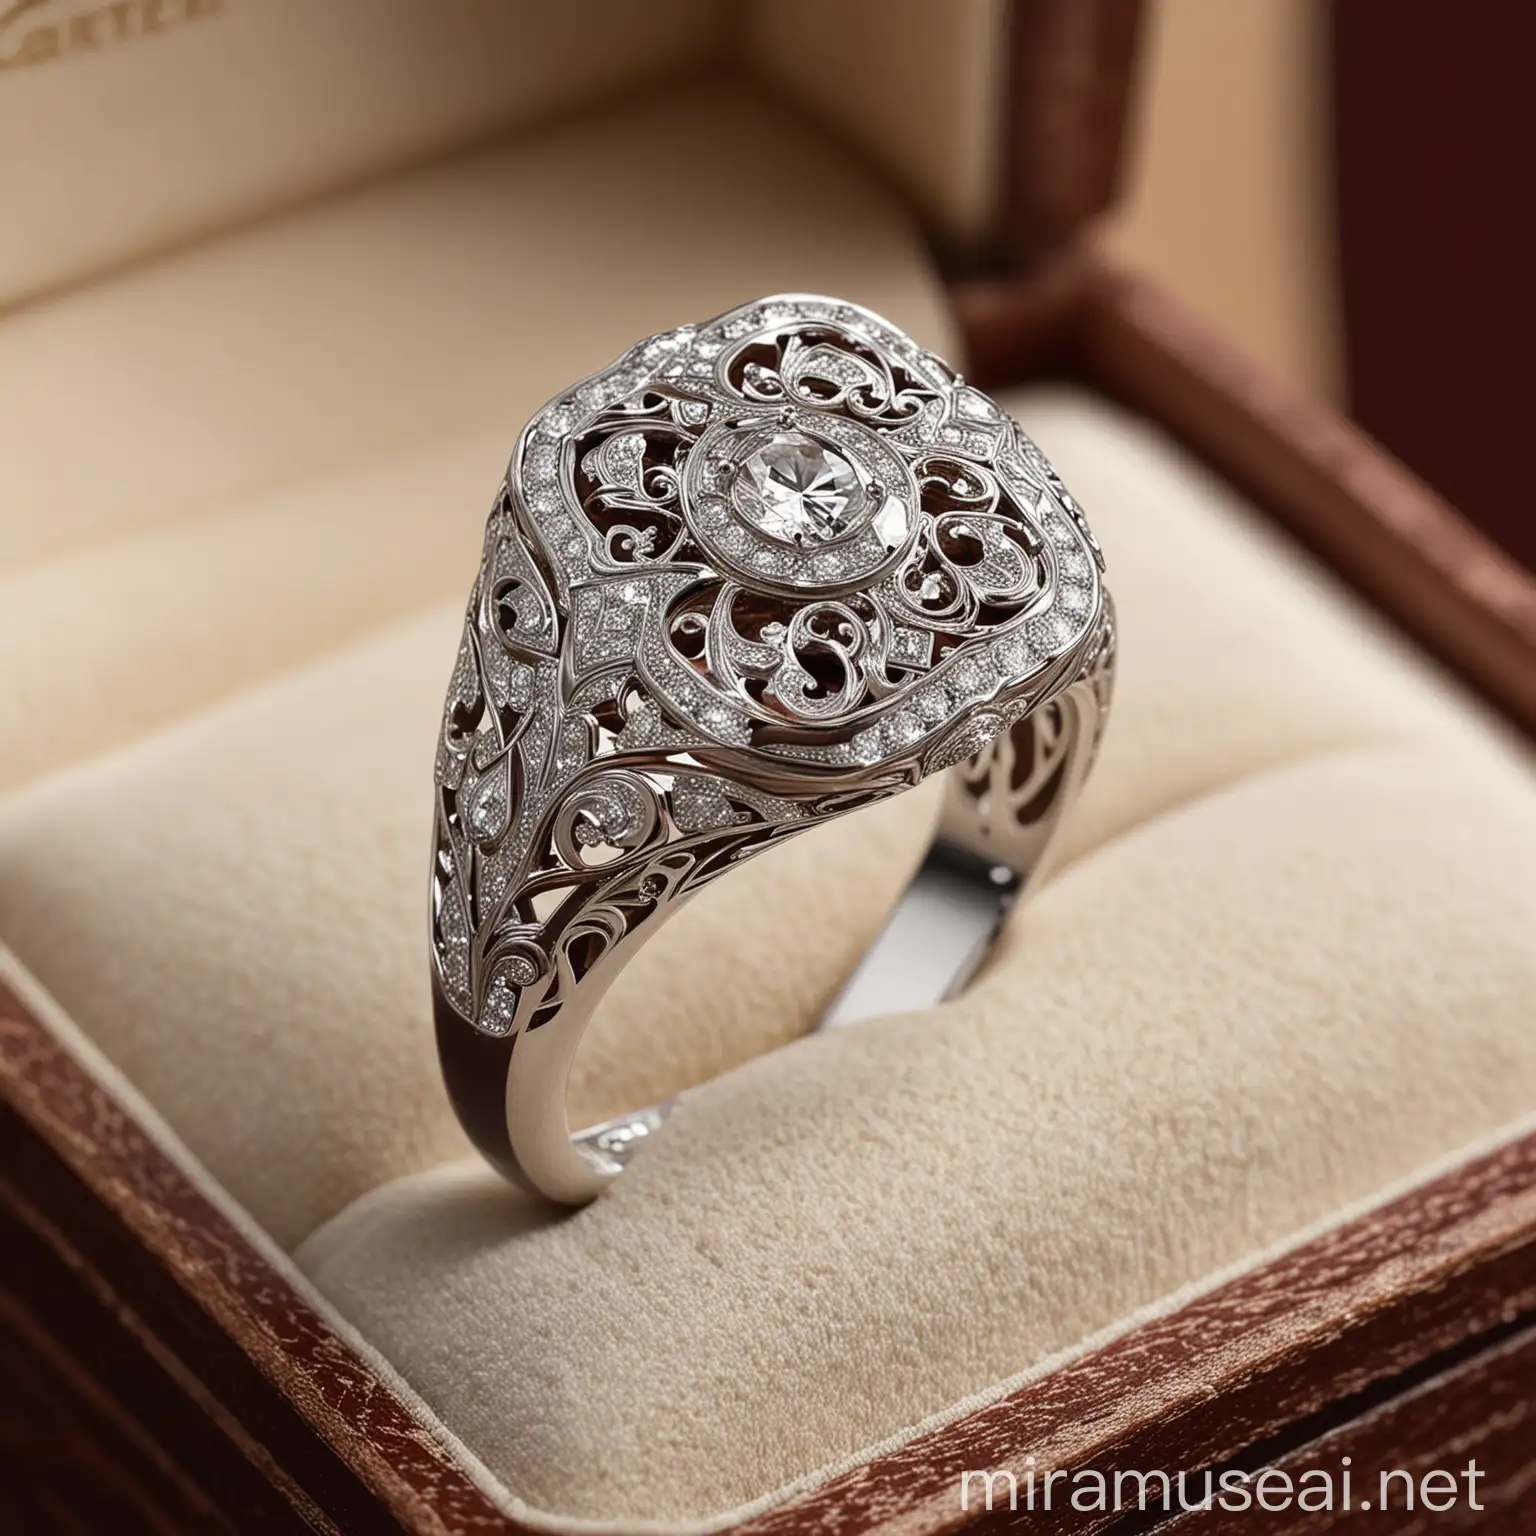 Elegant White Gold and Diamond Ring with Arabesque Patterns by Cartier